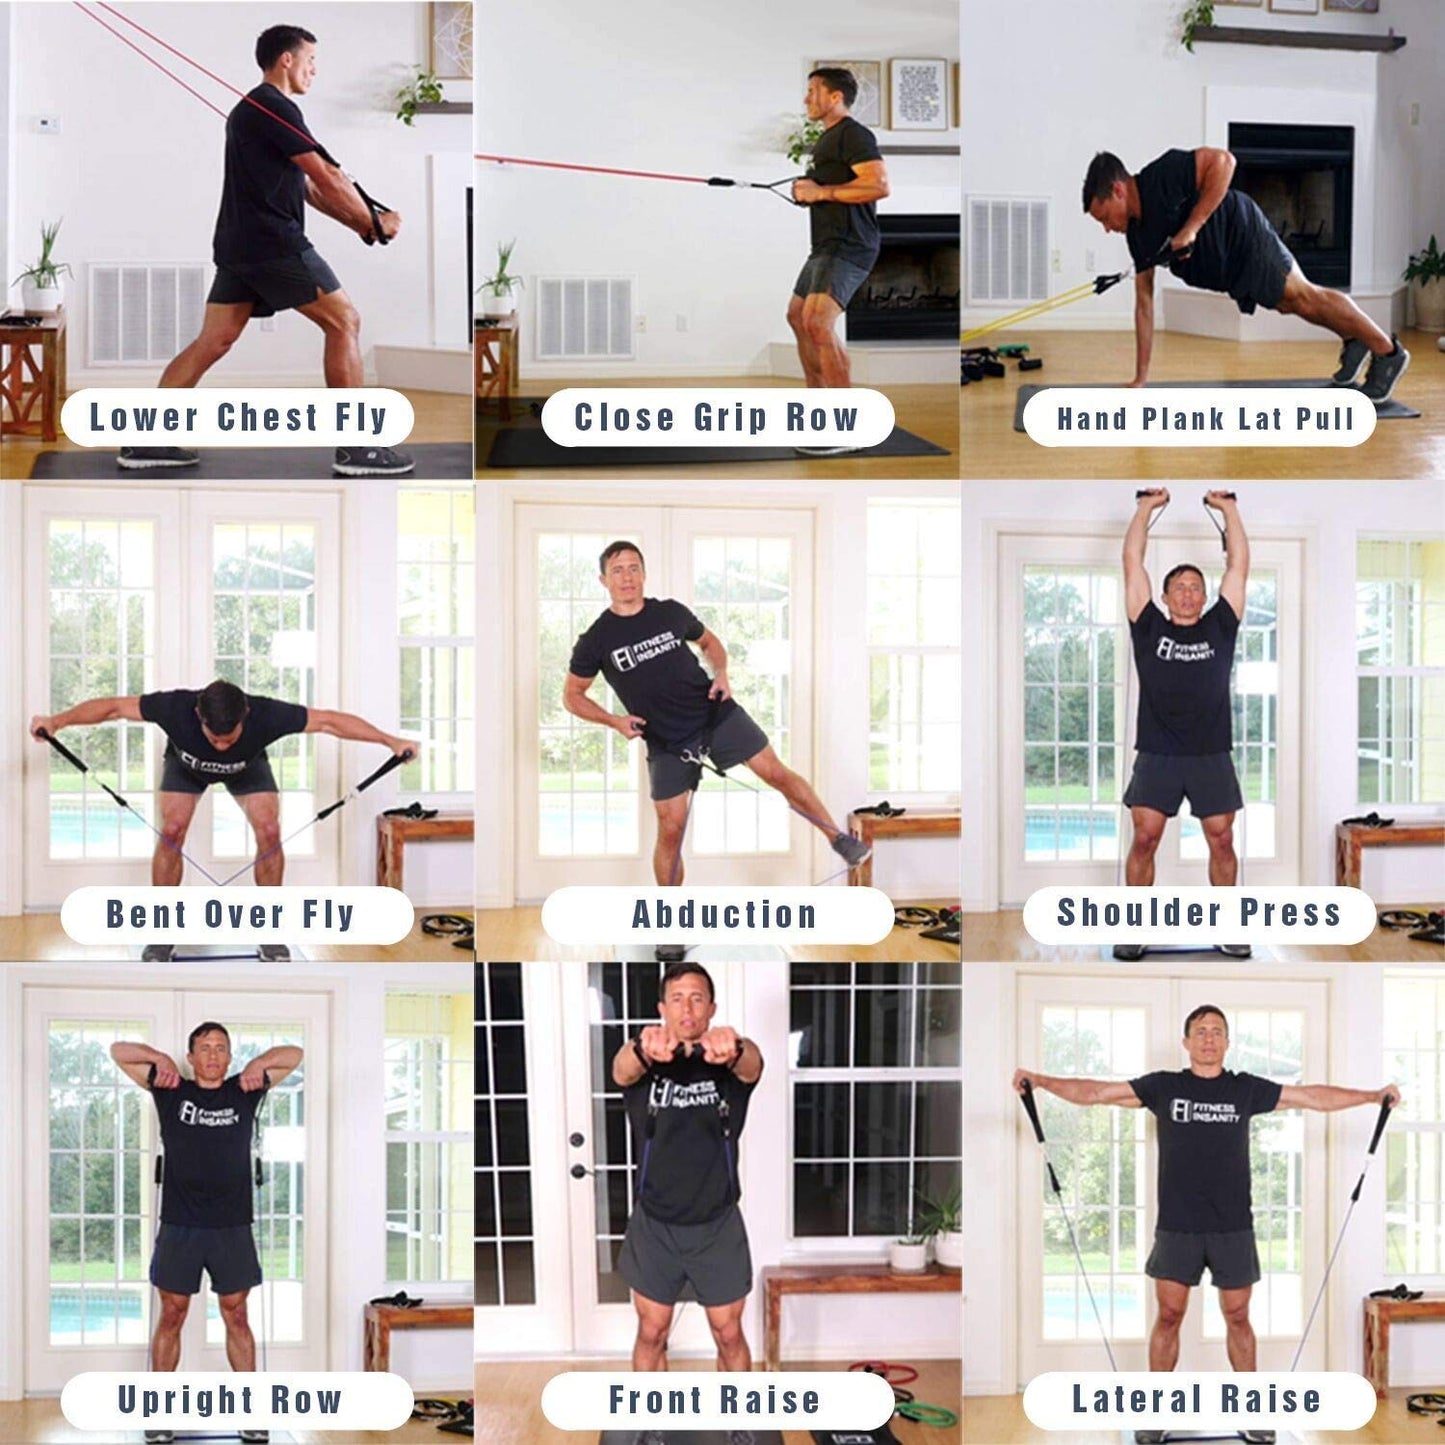 Resistance Exercise Bands